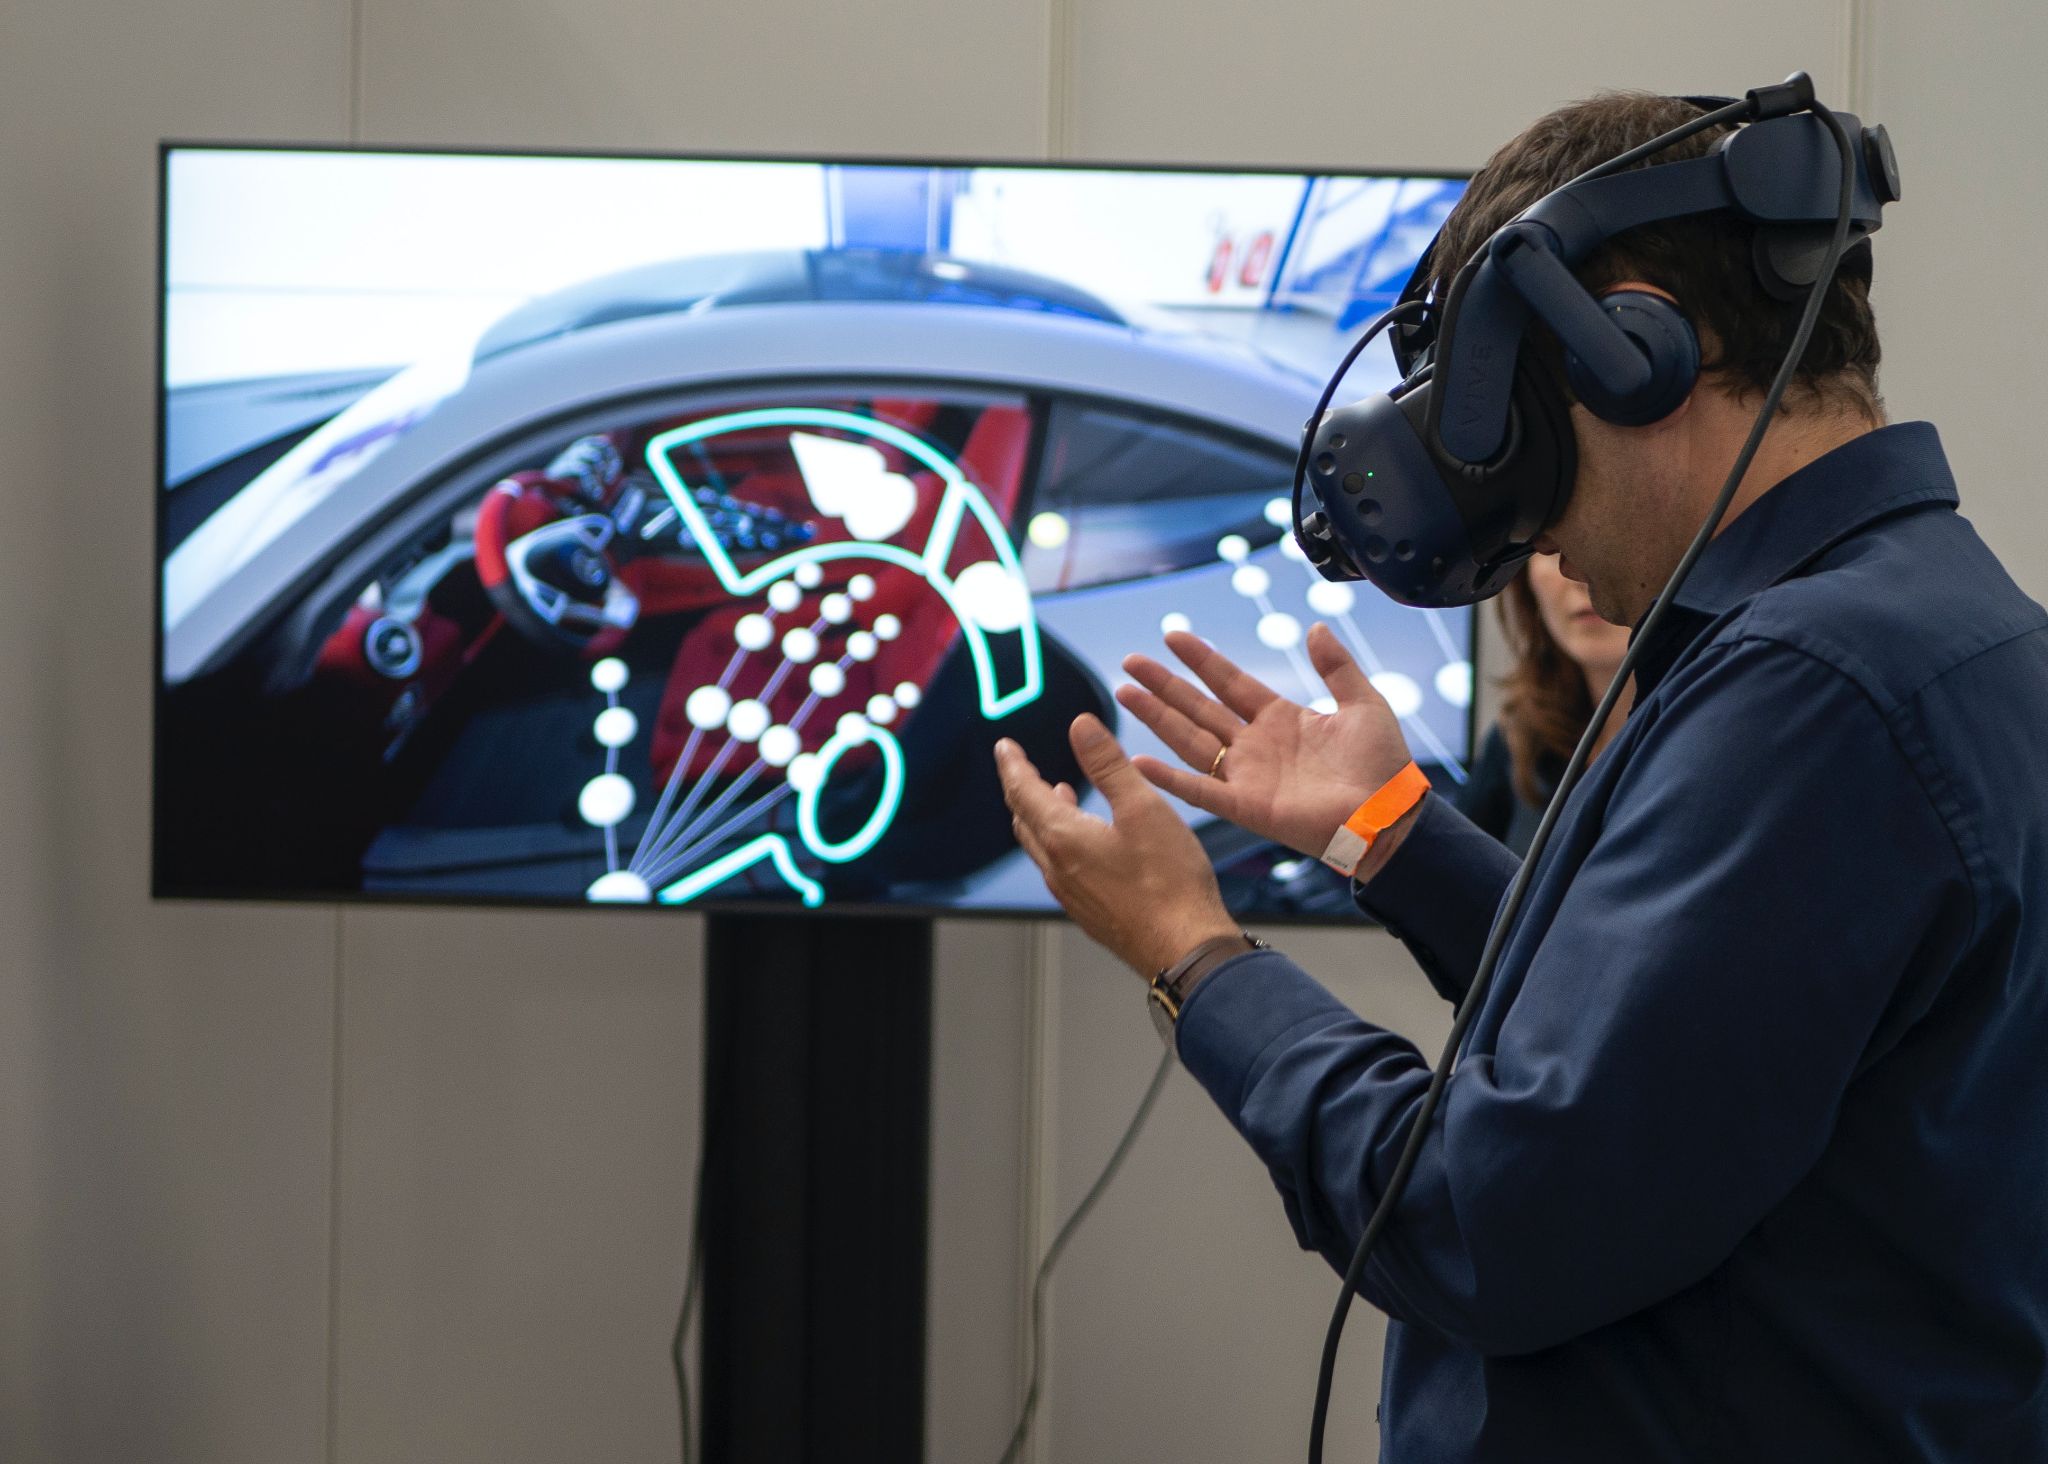 A man wearing VR goggles in front of a TV screen featuring a car